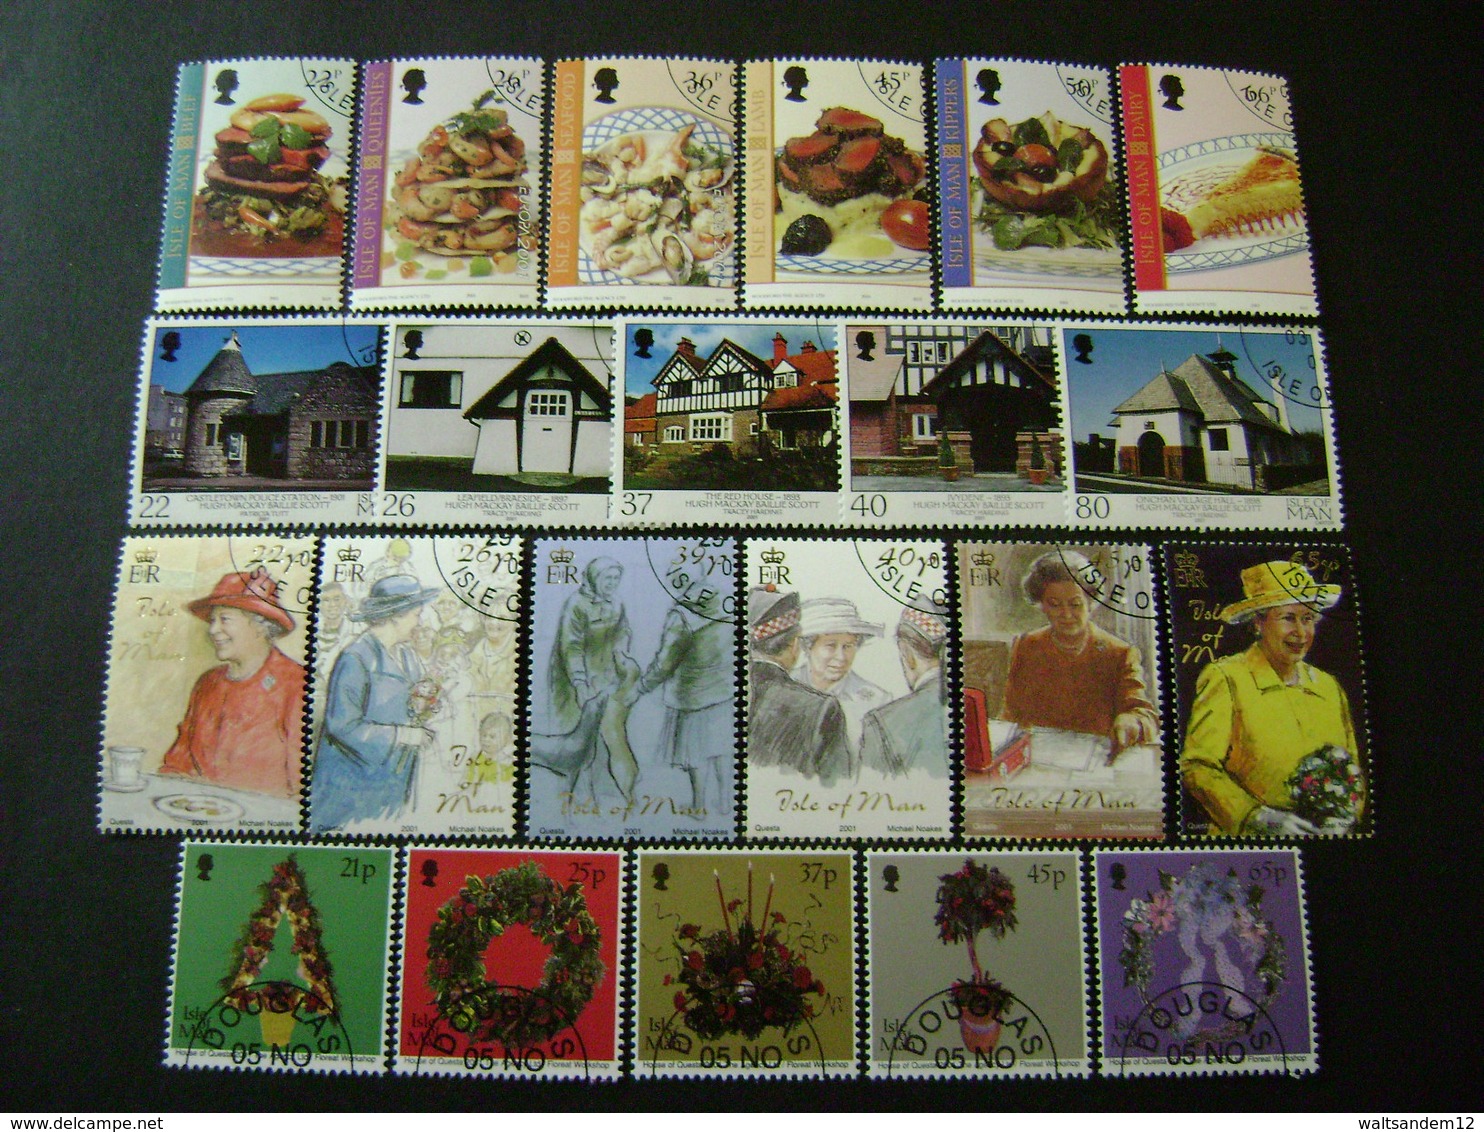 Isle Of Man 2001 Commemorative/special Issues (SG 917-957, 959-969) 3 Images - Used [Sale Price] - Isle Of Man